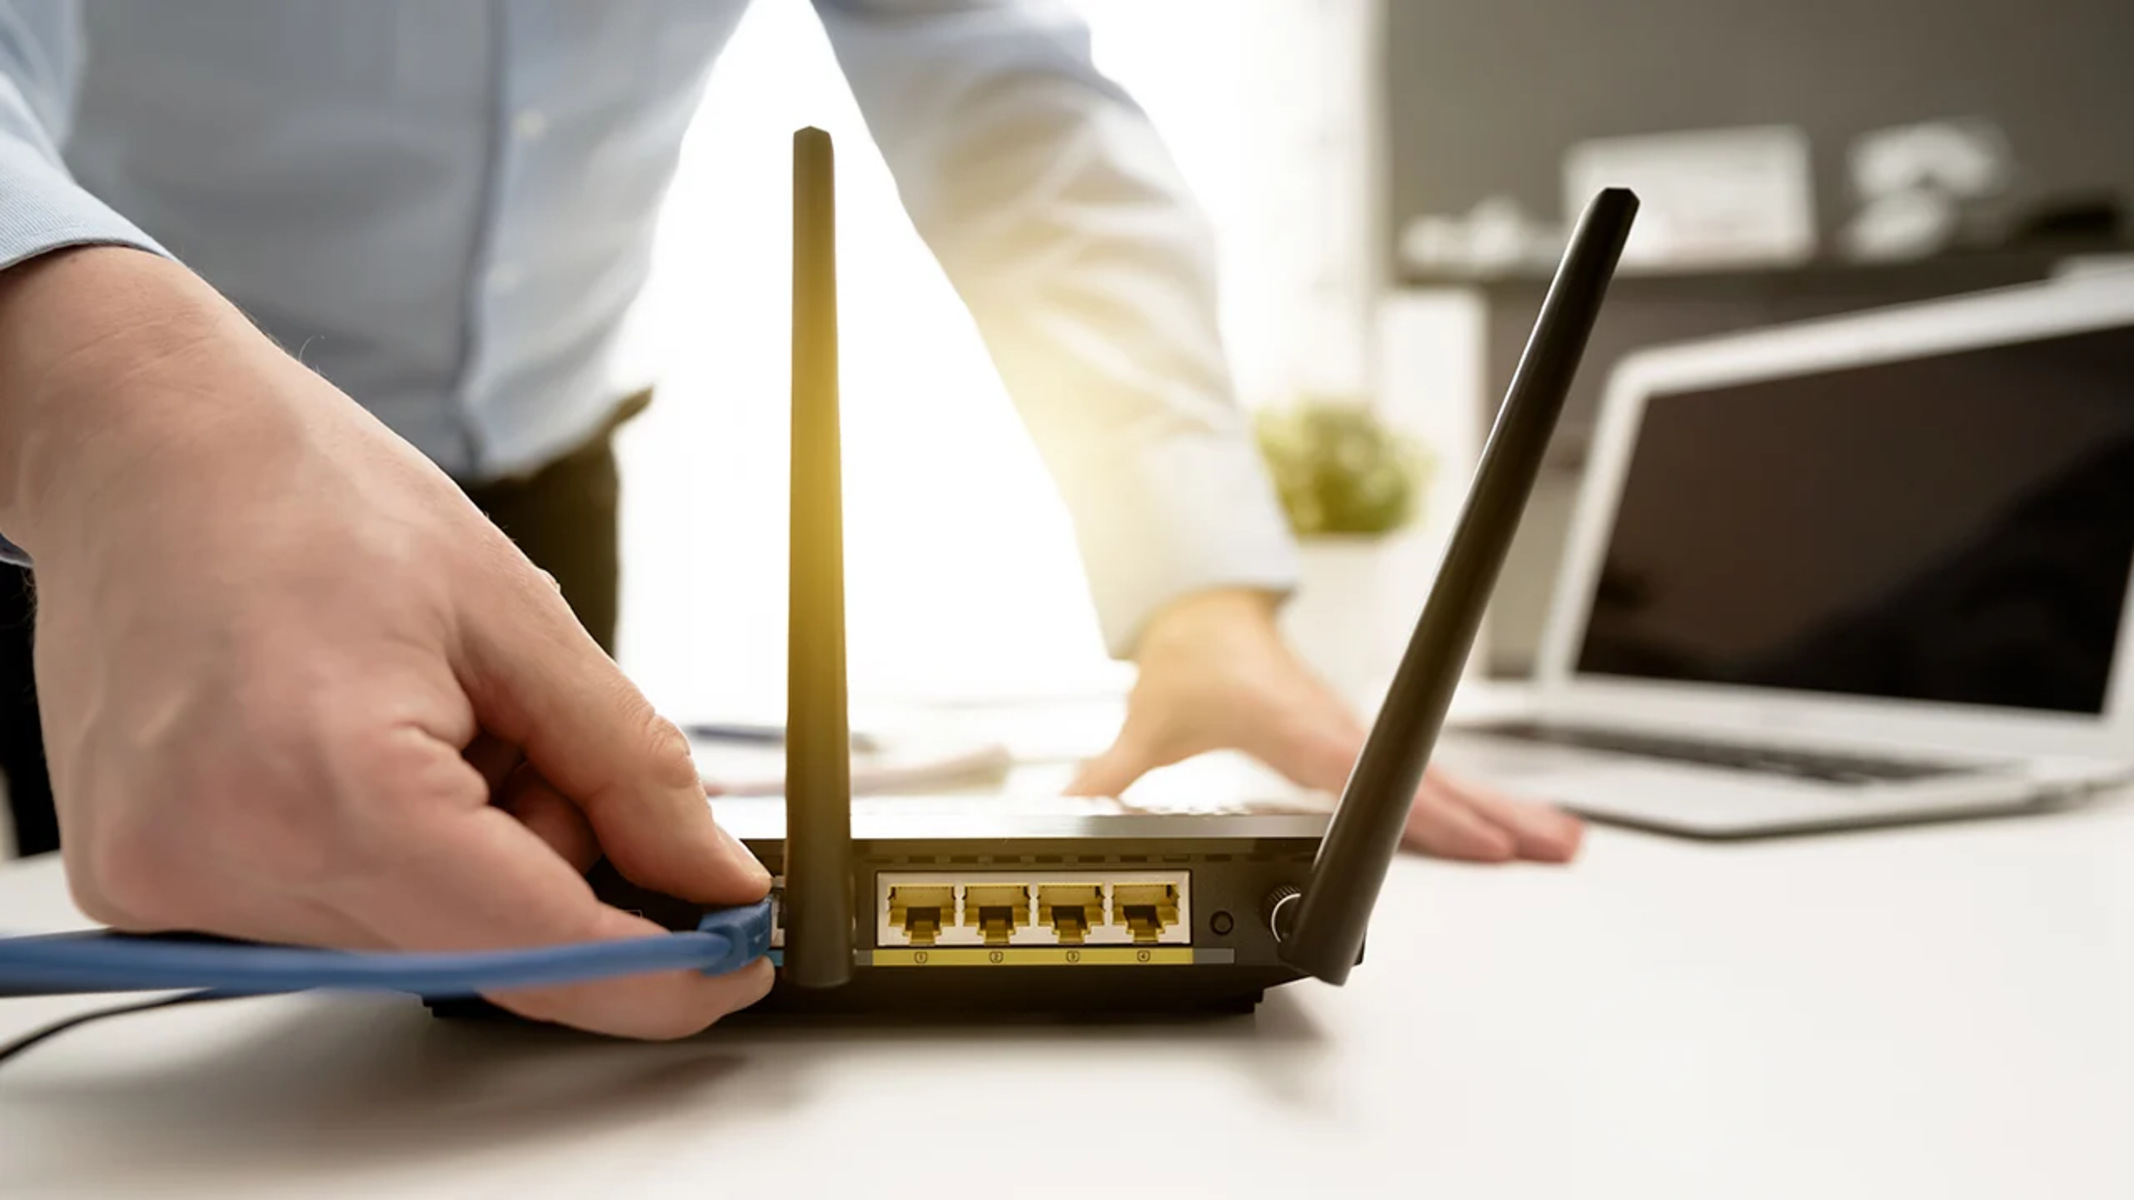 How To Hook Up A Wireless Router To A Cable Modem